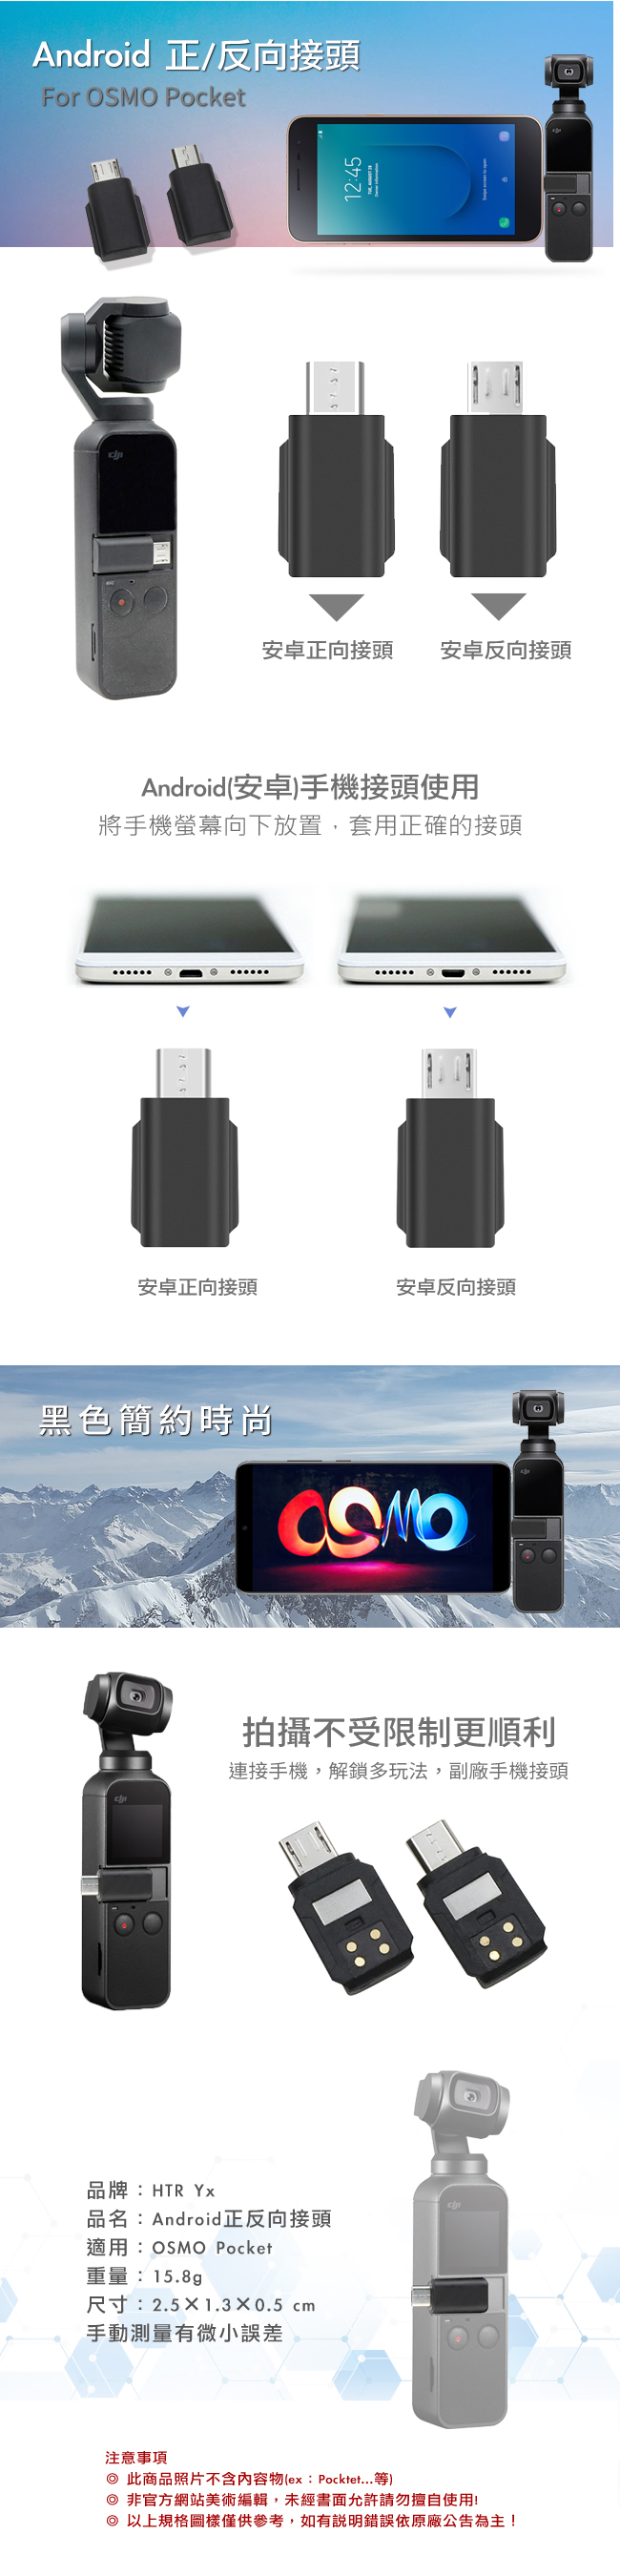 HTR Yx Android(安卓)反向接頭 For OSMO Pocket